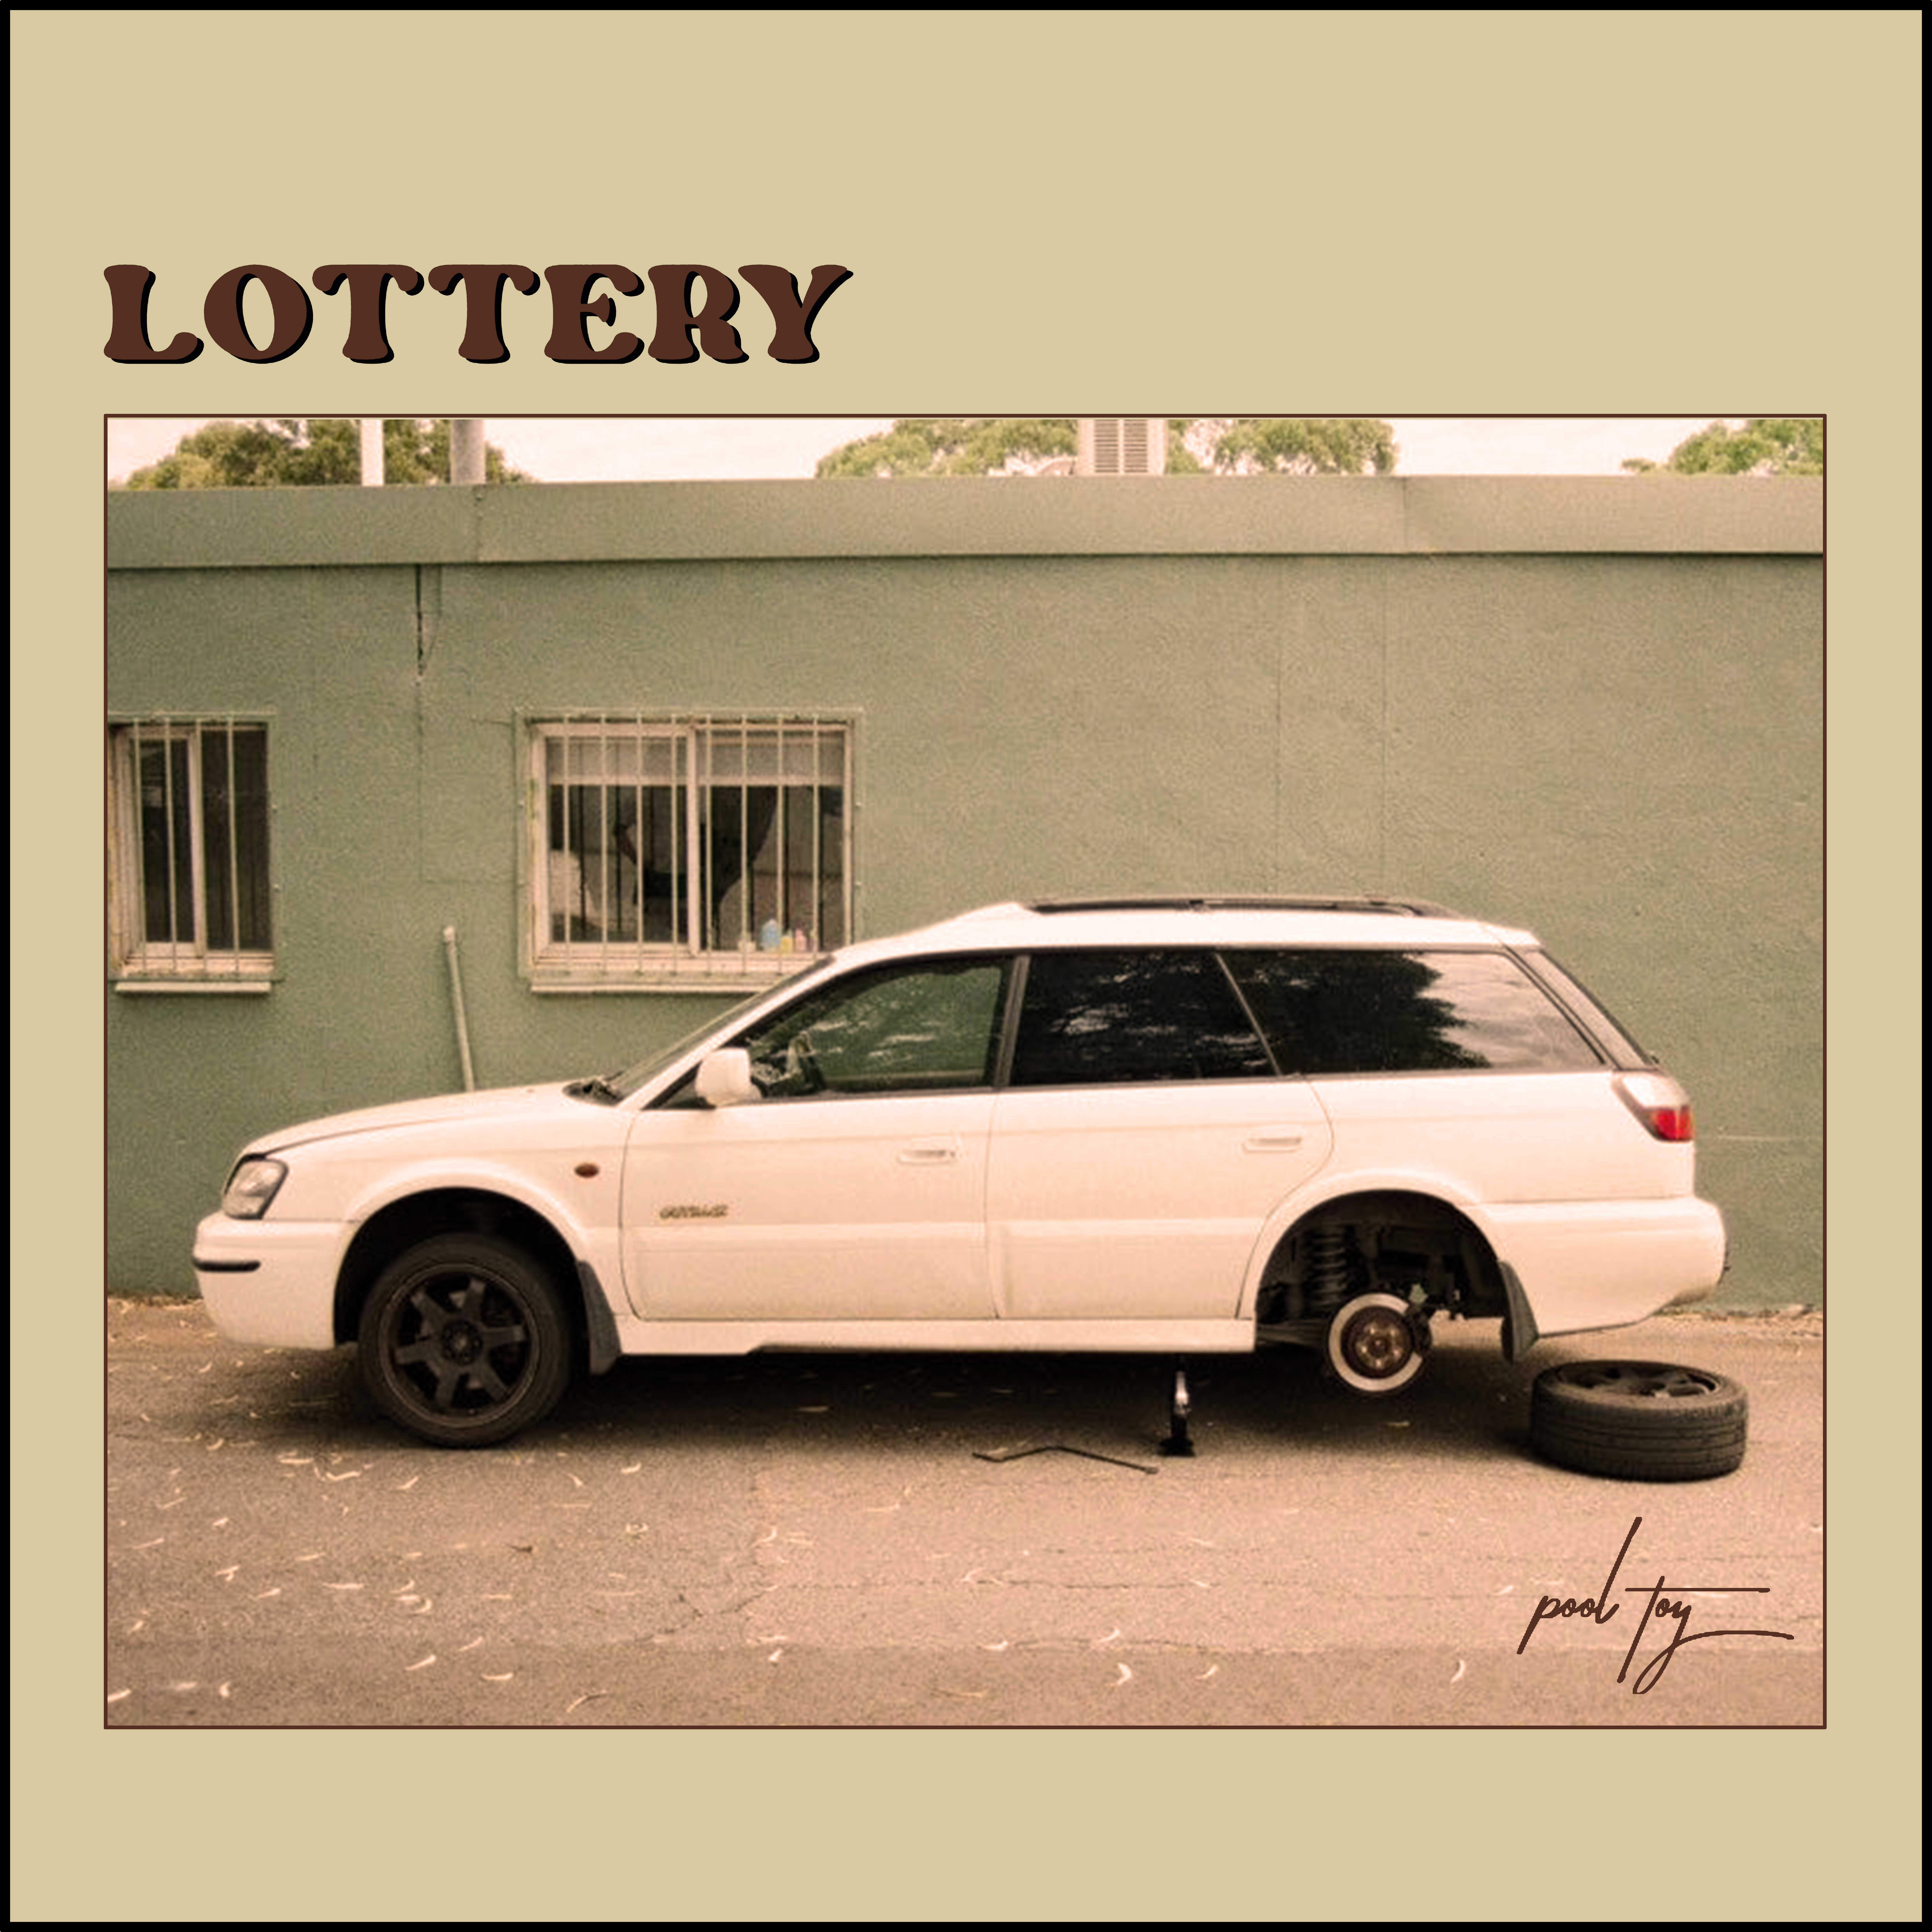 Artwork for track: Lottery by POOL TOY